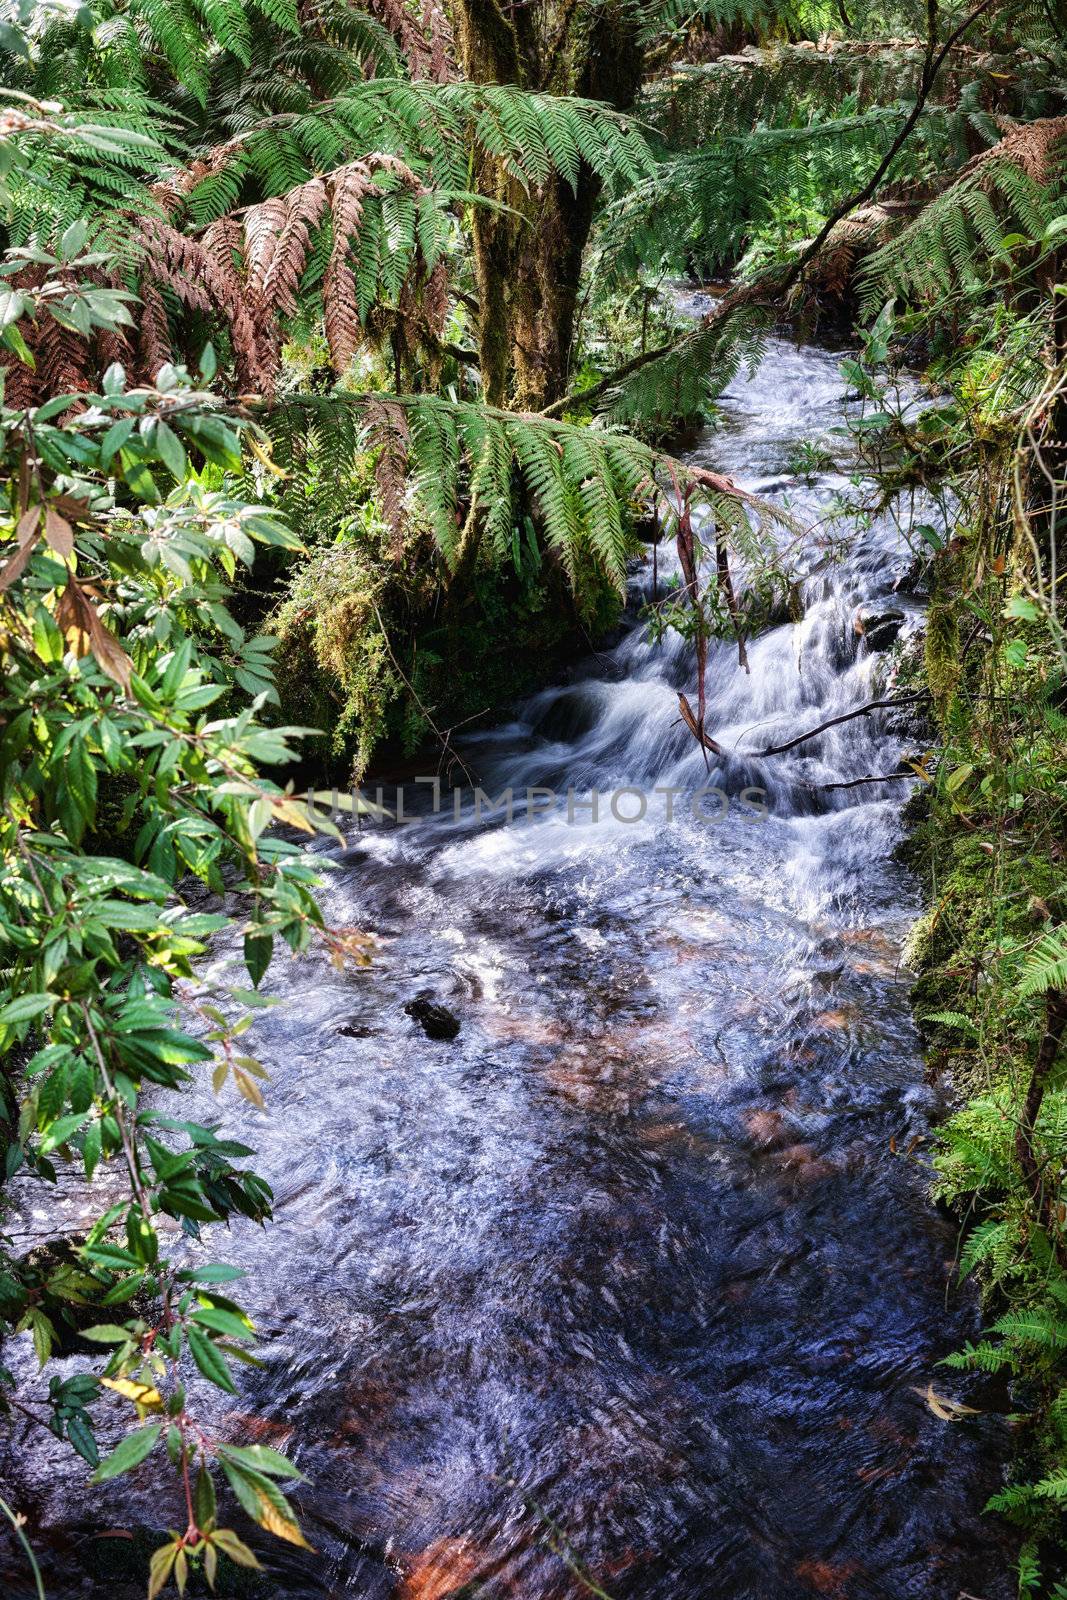 beautiful little stream or river going through the rainforest